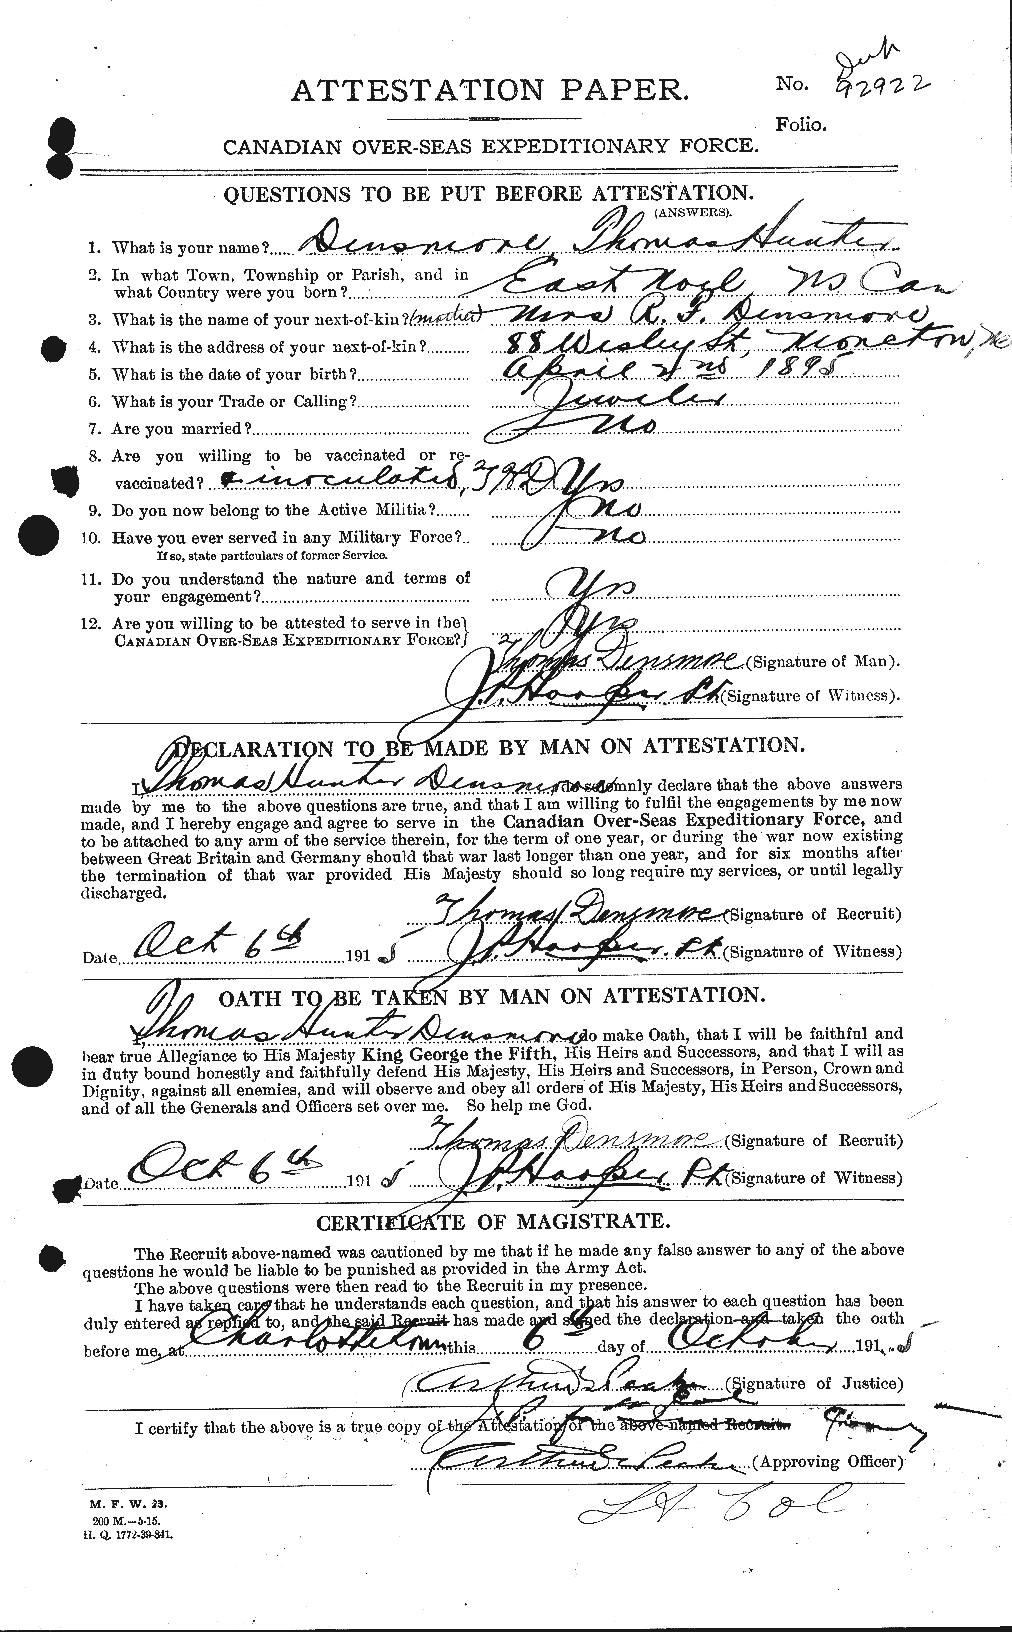 Personnel Records of the First World War - CEF 286440a